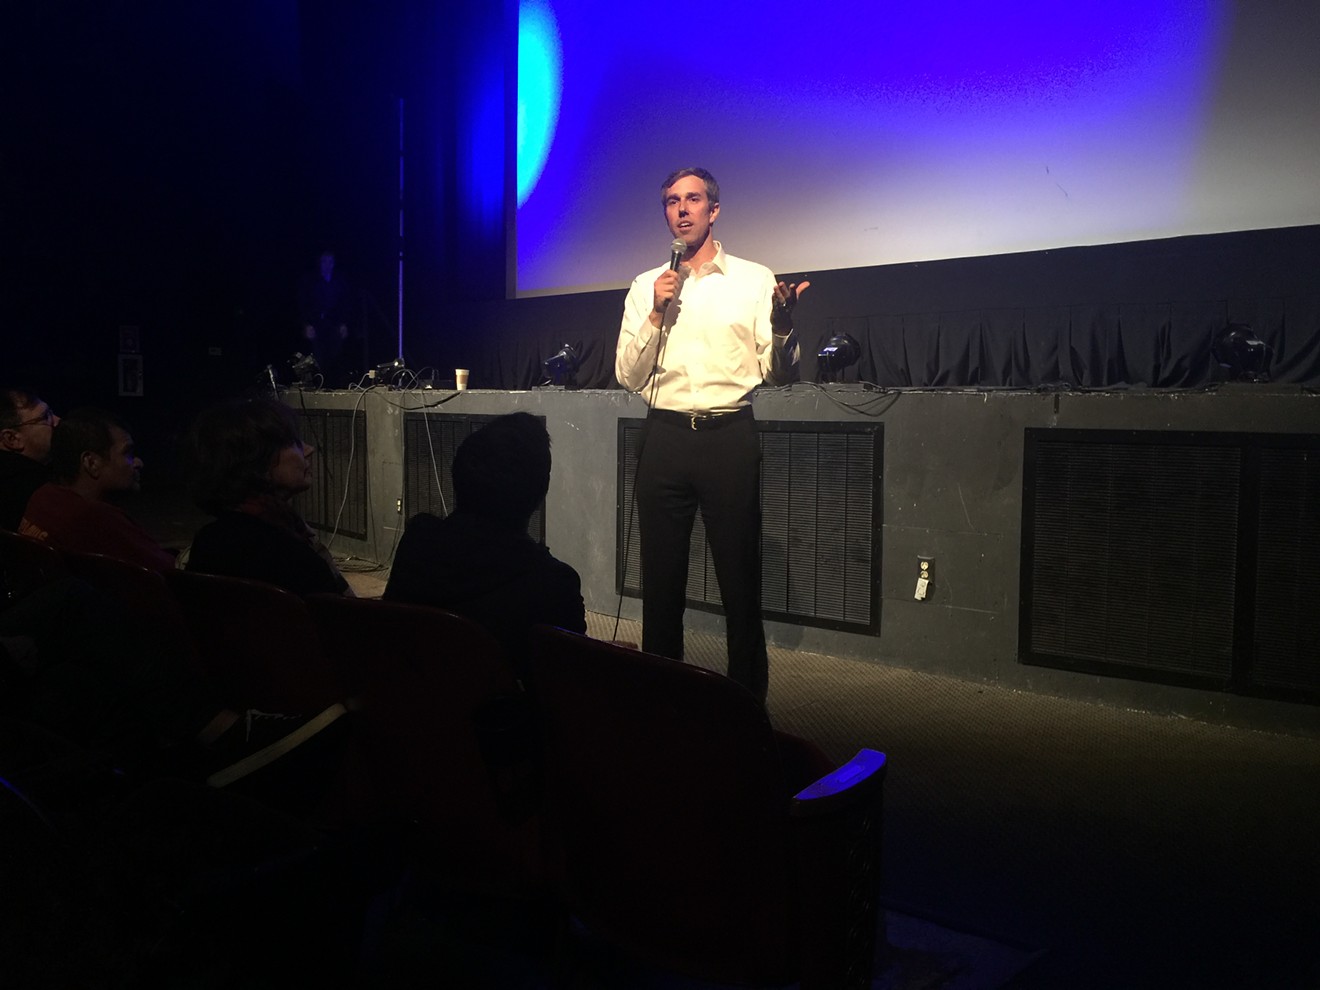 U.S. Rep. Beto O'Rourke met with a packed house for a town hall earlier this month at the Texas Theatre in Oak Cliff.